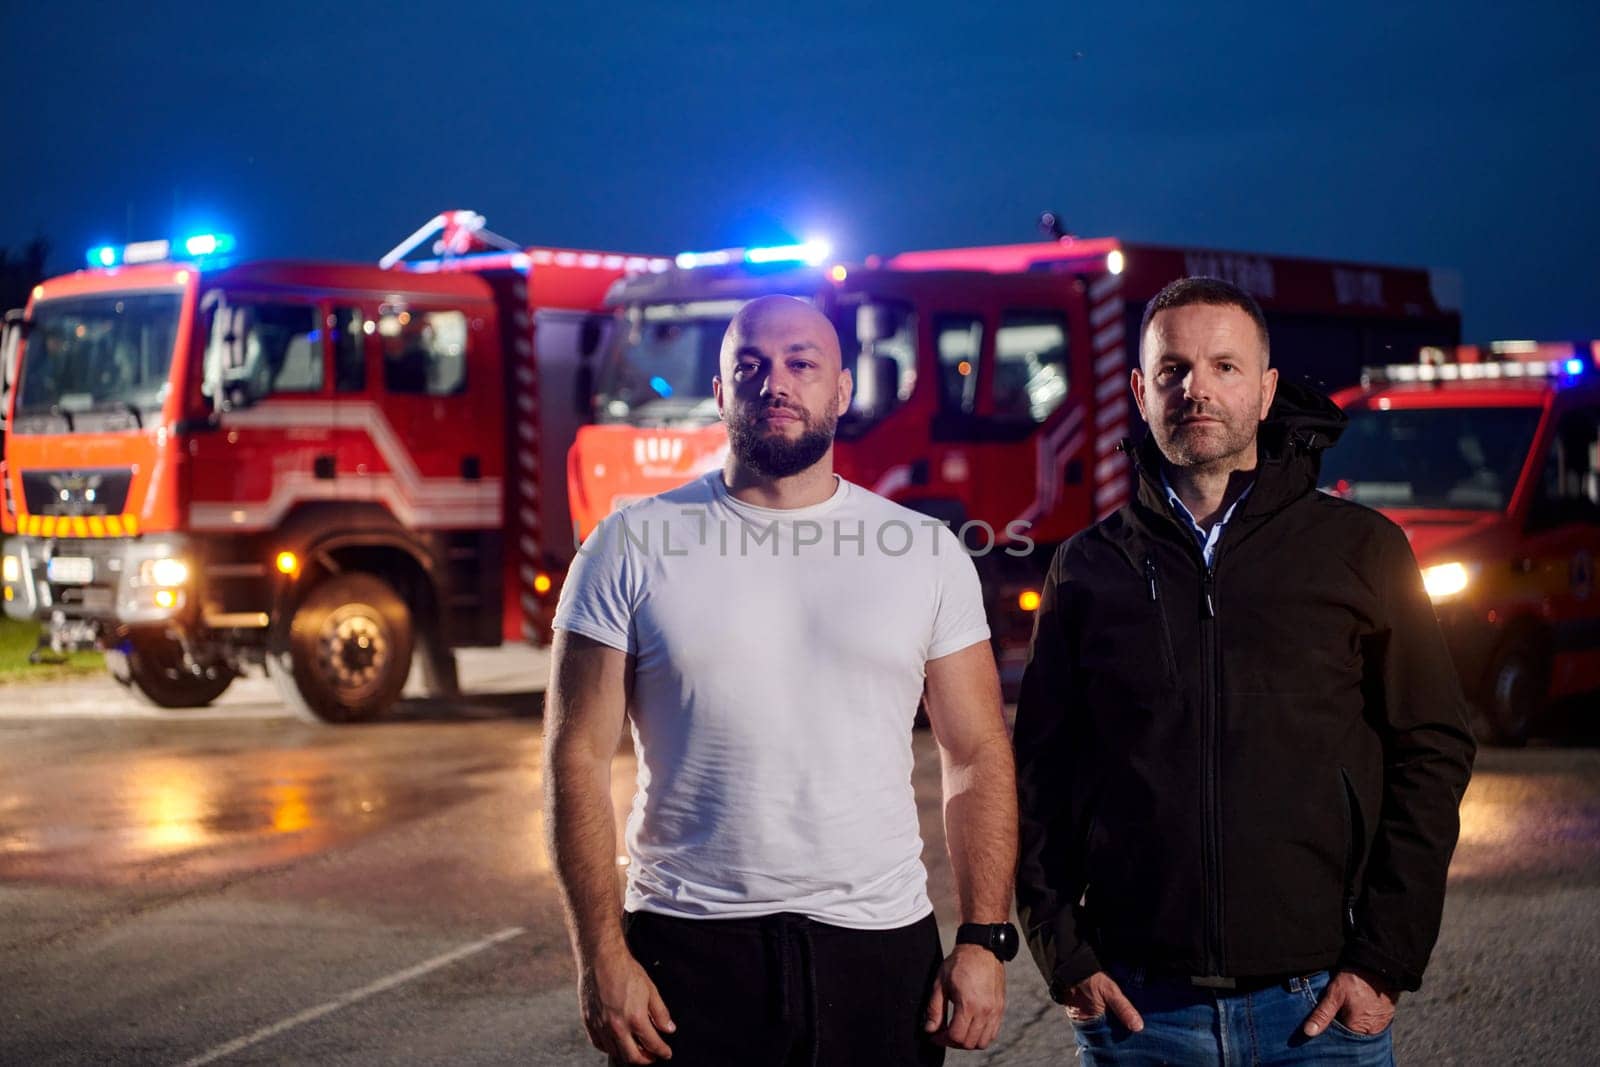 Group of firefighters, dressed in civilian clothing, stand in front of fire trucks during the night, showcasing a moment of camaraderie and unity among the team as they reflect on their duties and the challenges faced during their firefighting service.